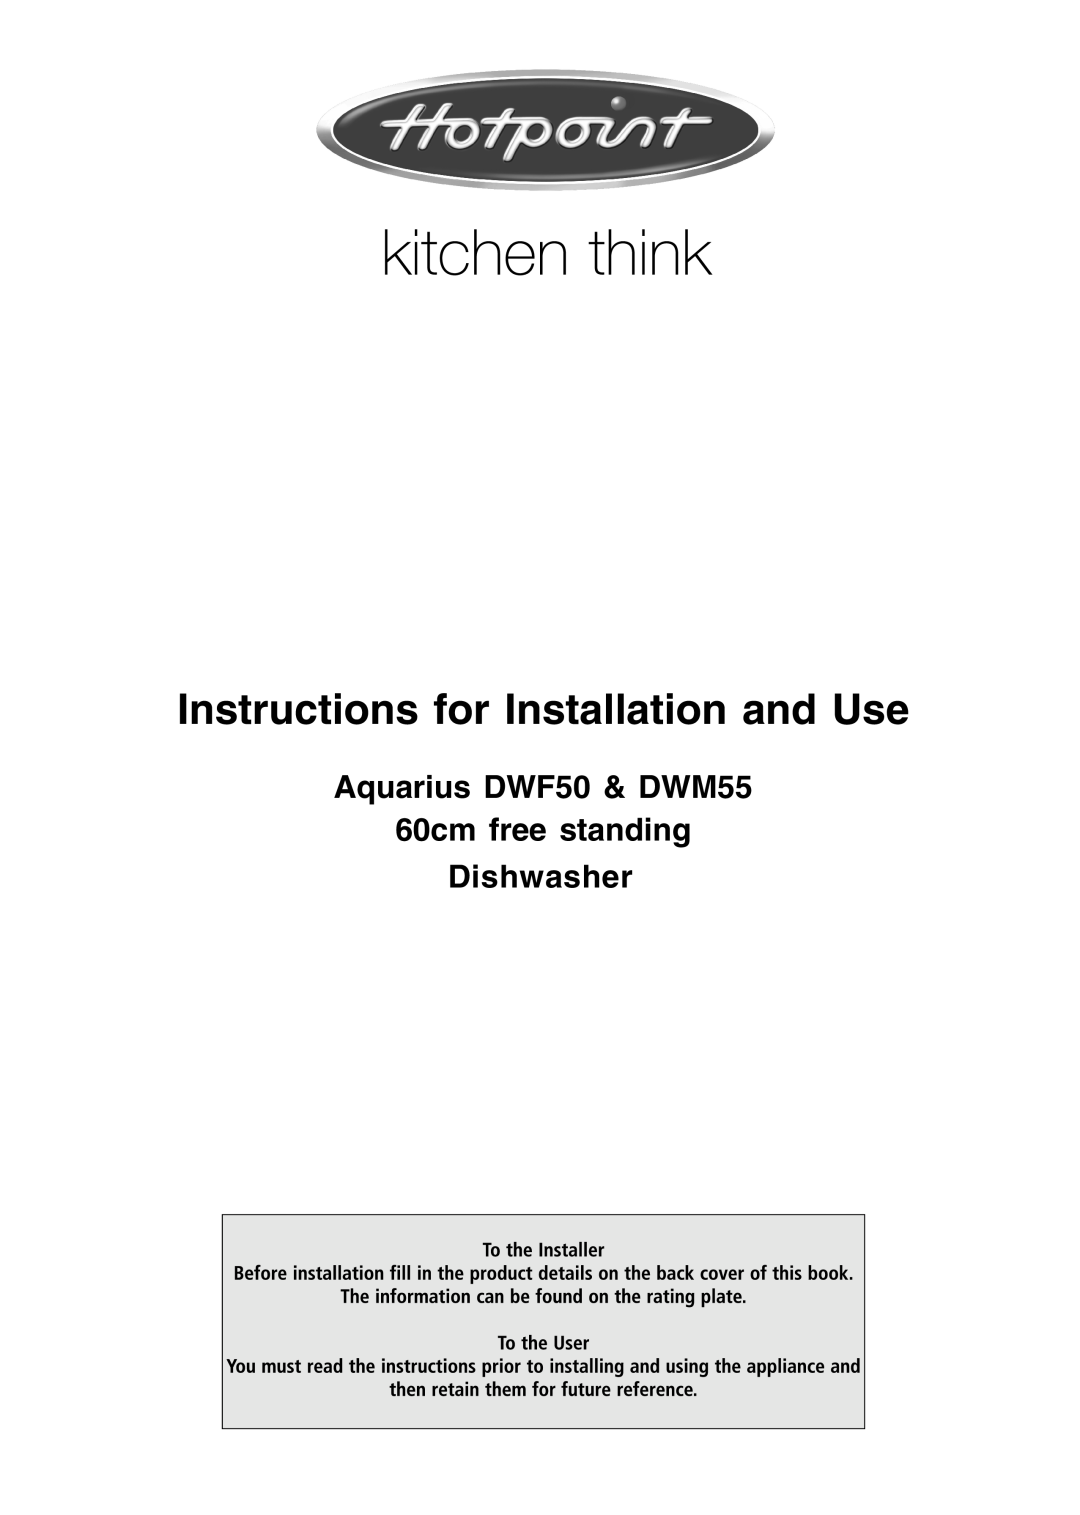 Hotpoint manual Instructions for Installation and Use, Aquarius DWF50 & DWM55 60cm free standing, Dishwasher 